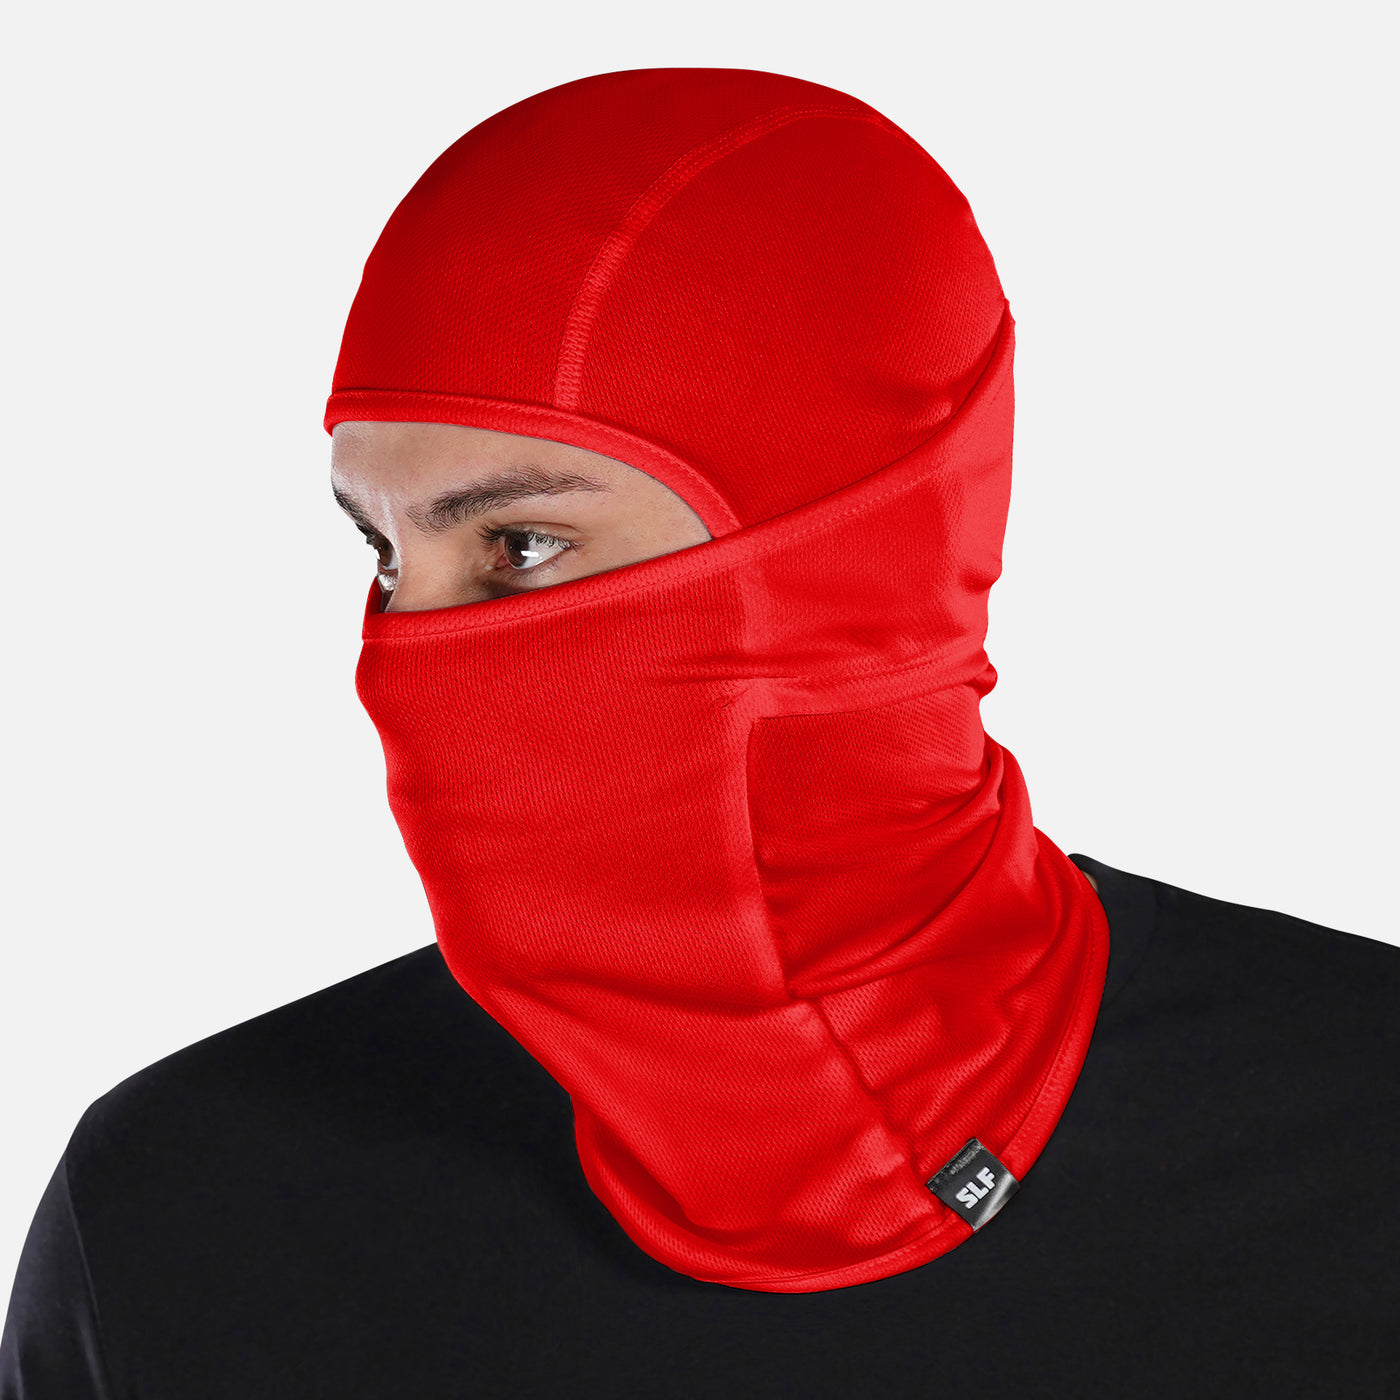 Hue Red Loose-fitting Shiesty Mask